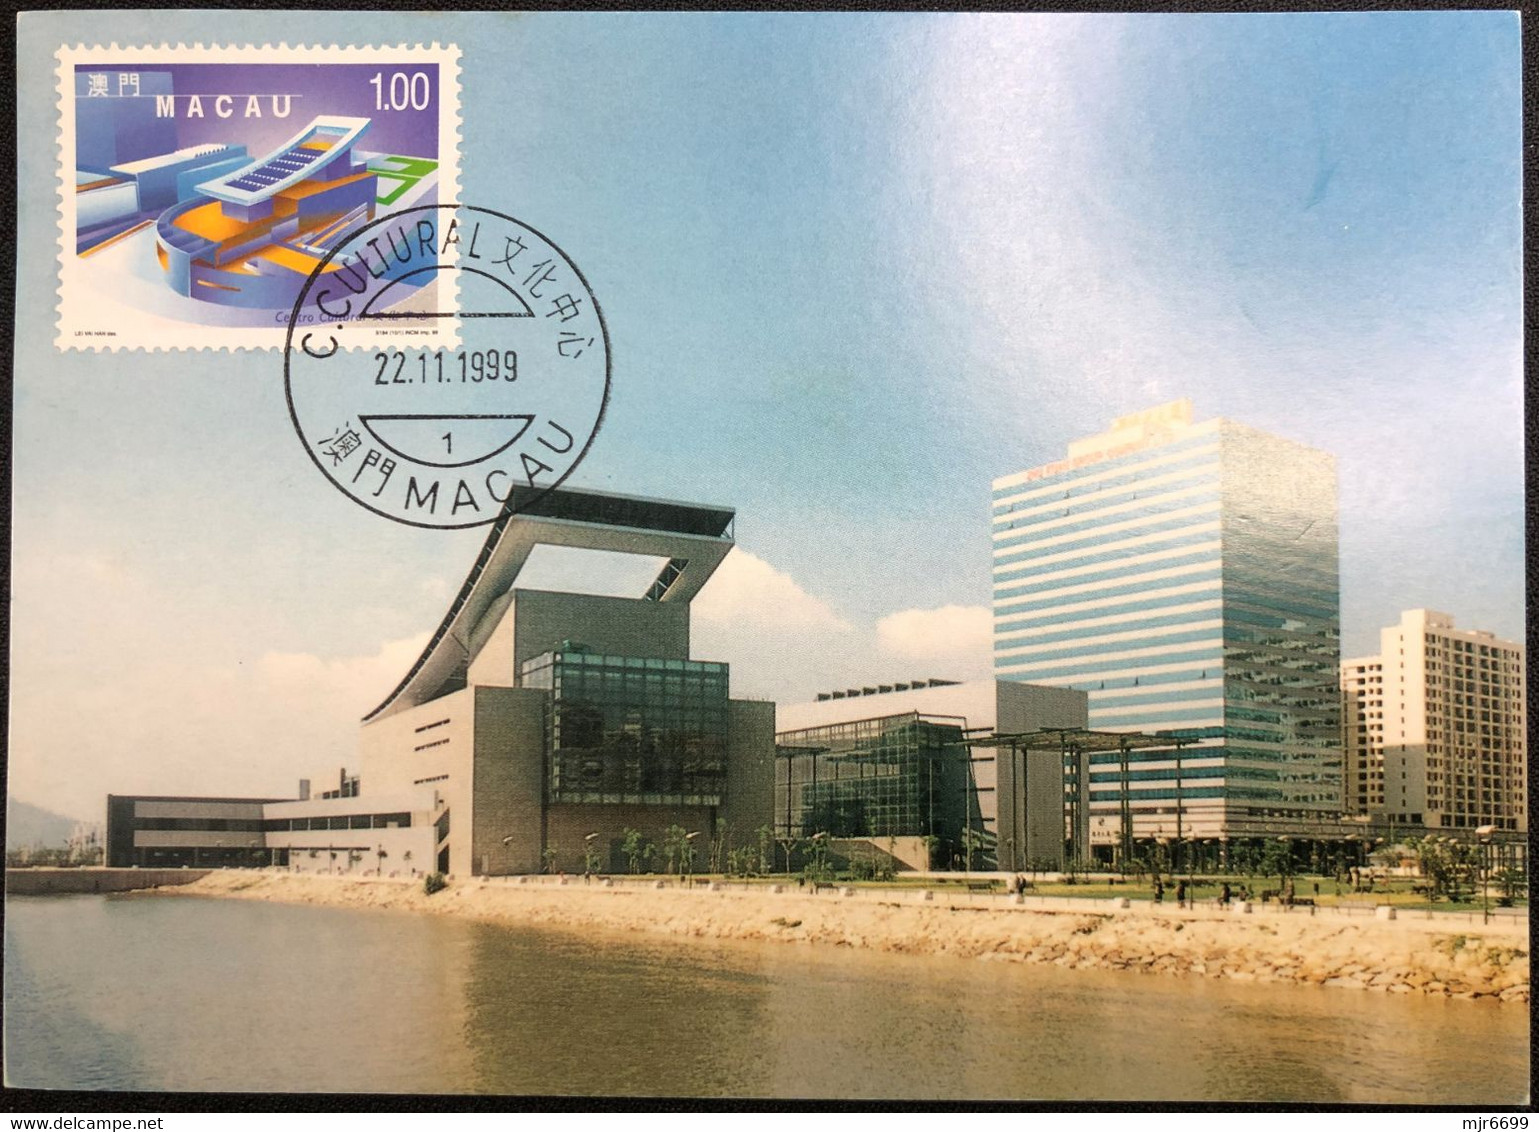 MACAU 1999 CULTURAL CENTRE MAX CARD (FIRST DAY WORK OF THE POST OFFICE IN THIS CENTRE) - Cartes-maximum